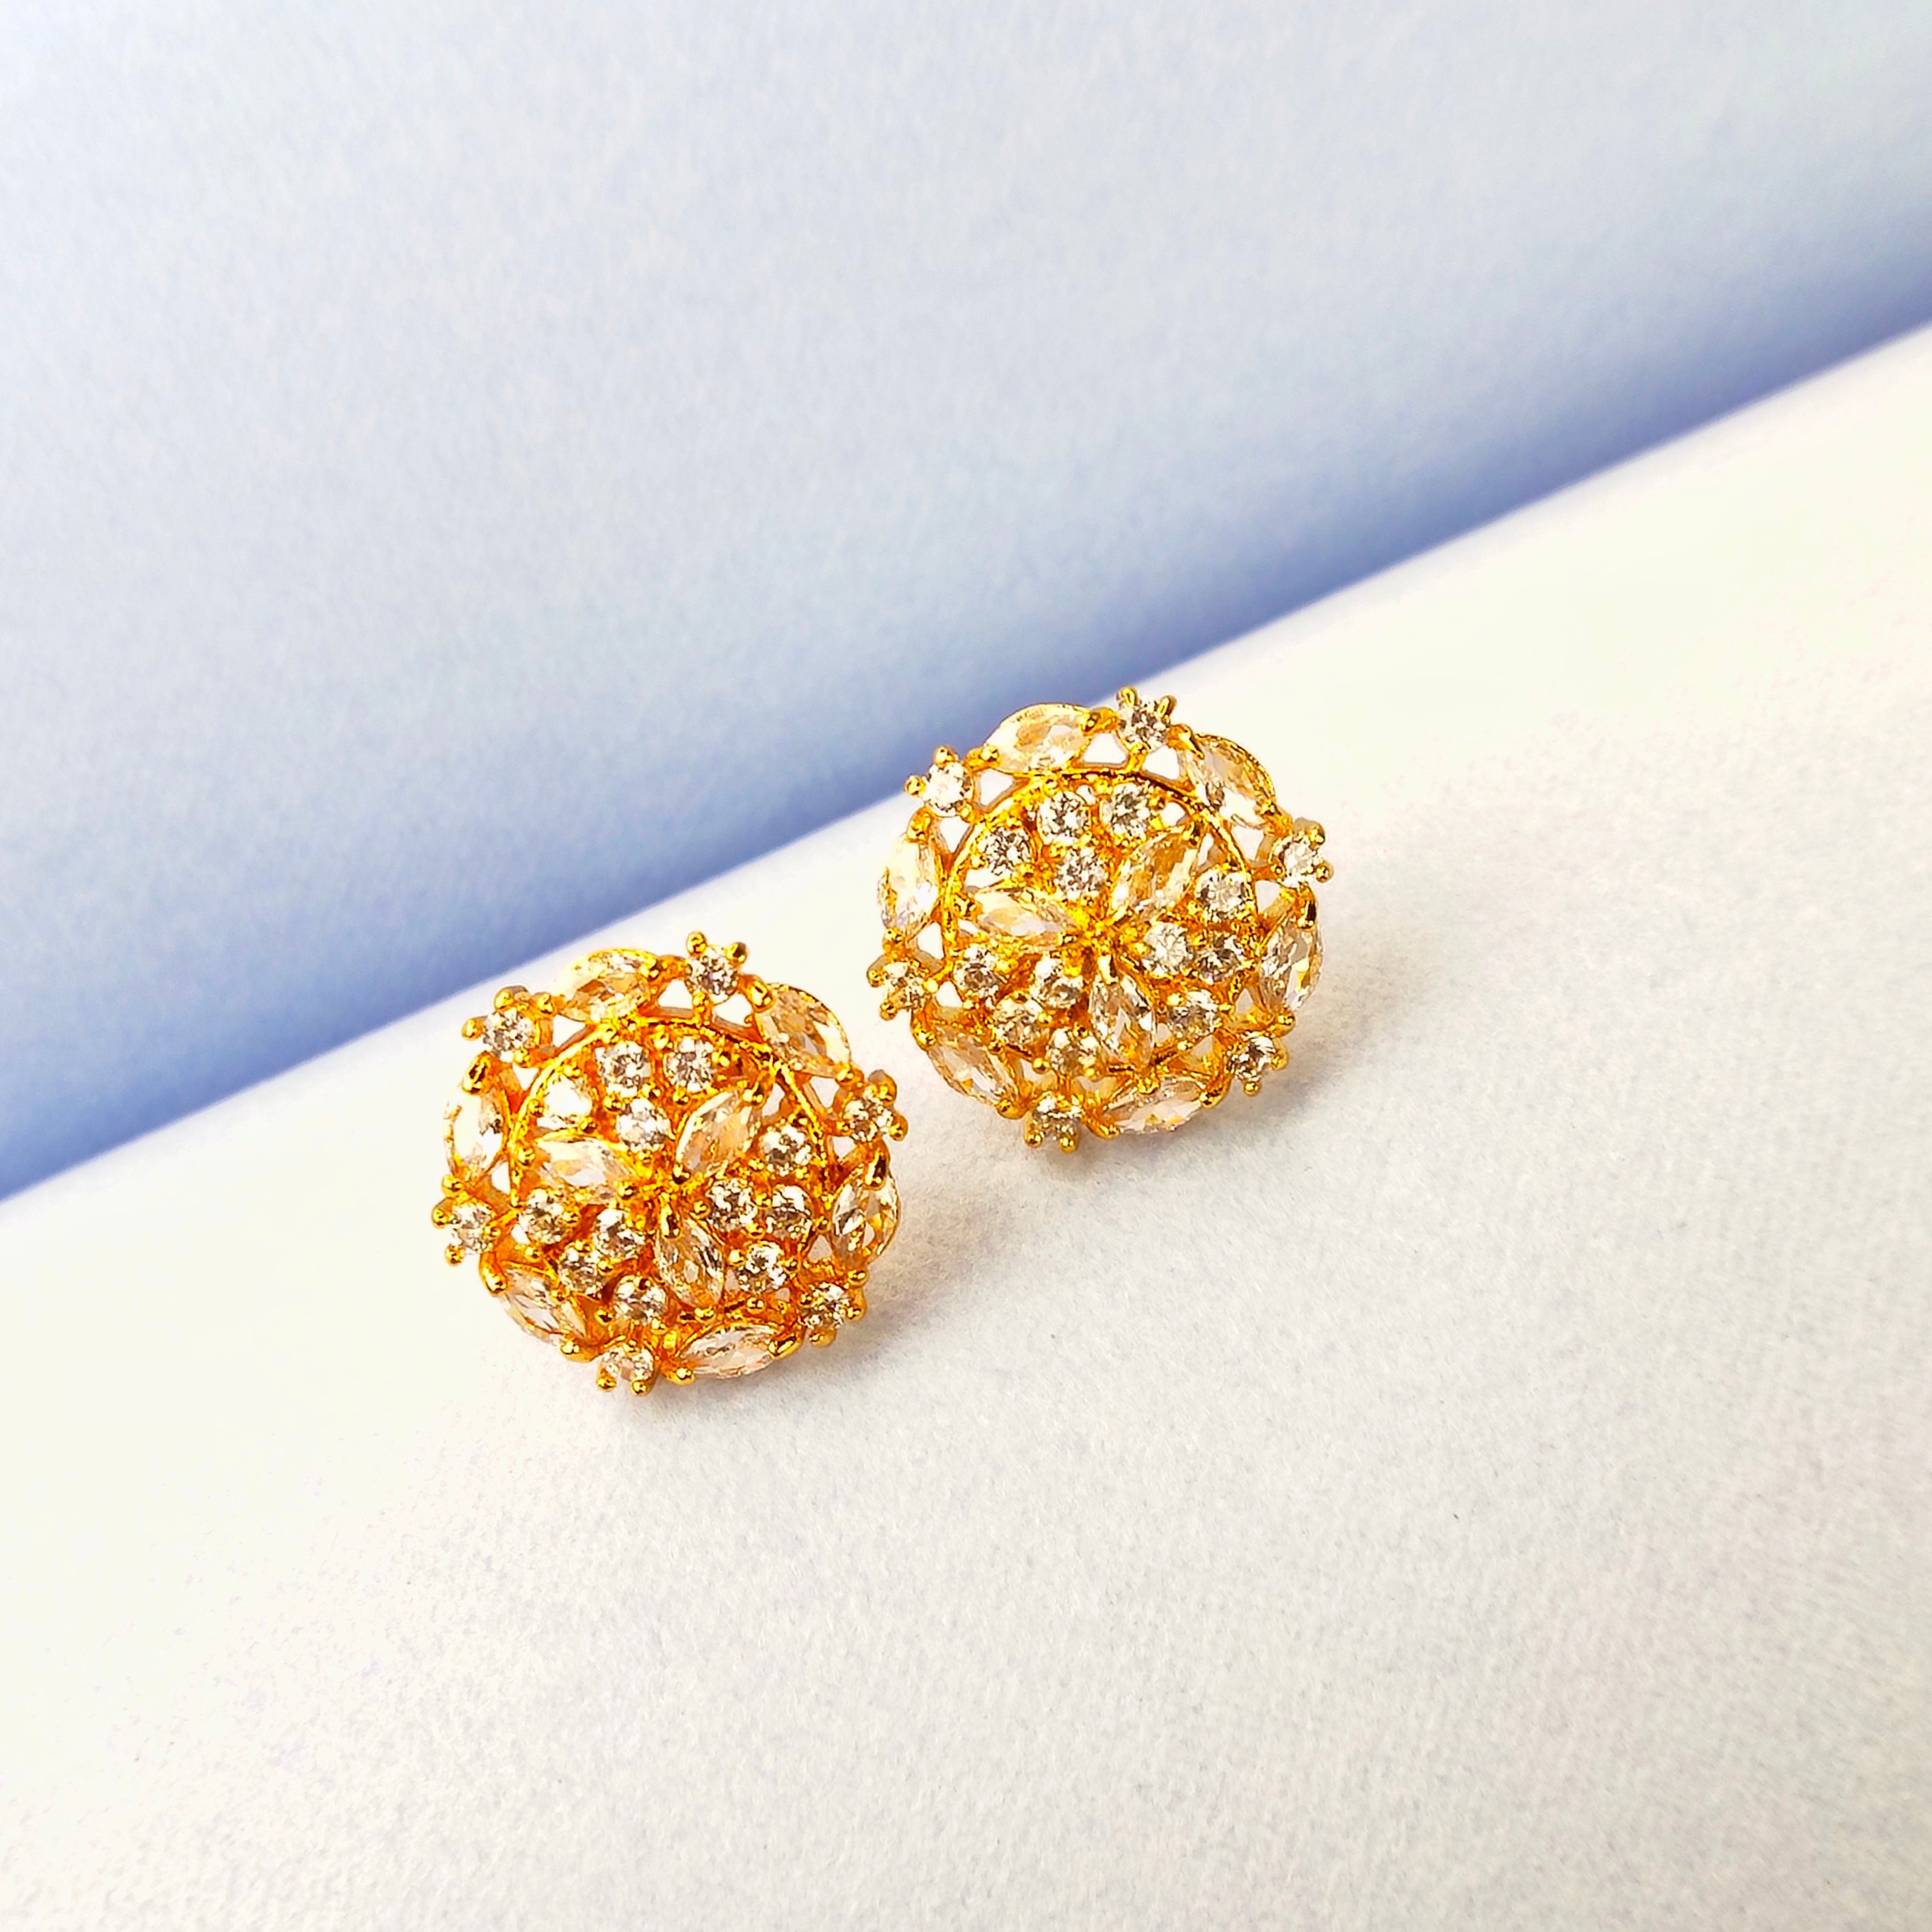 These gold earrings are best for daily wear